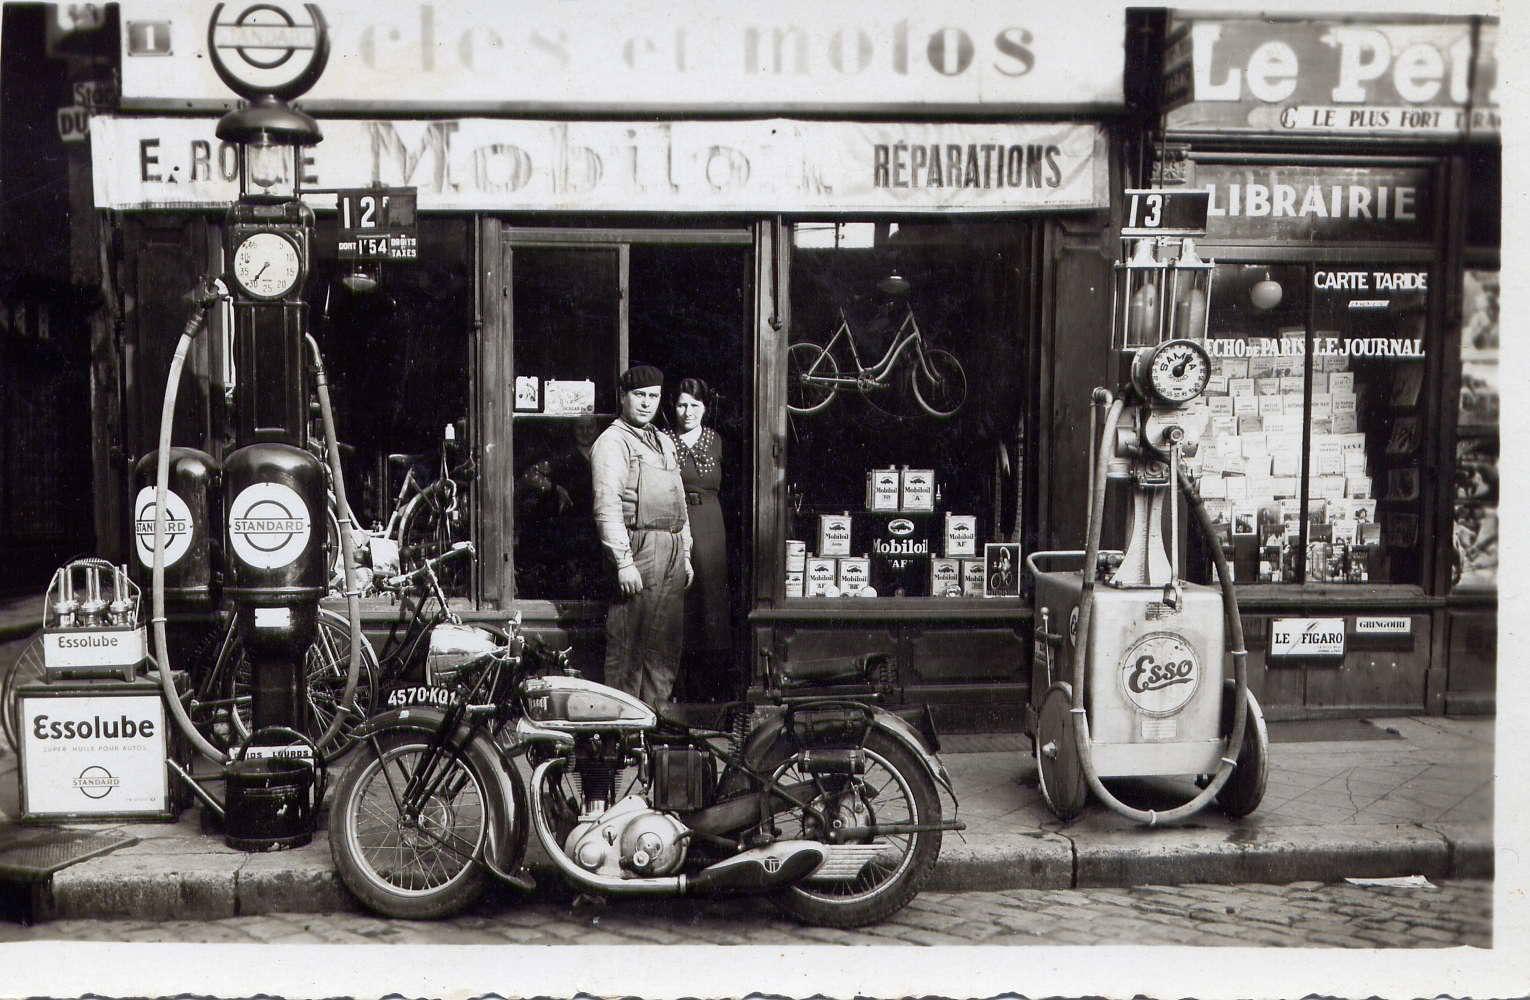 A small general store with gas pumps out front in Paris, France in 1930.